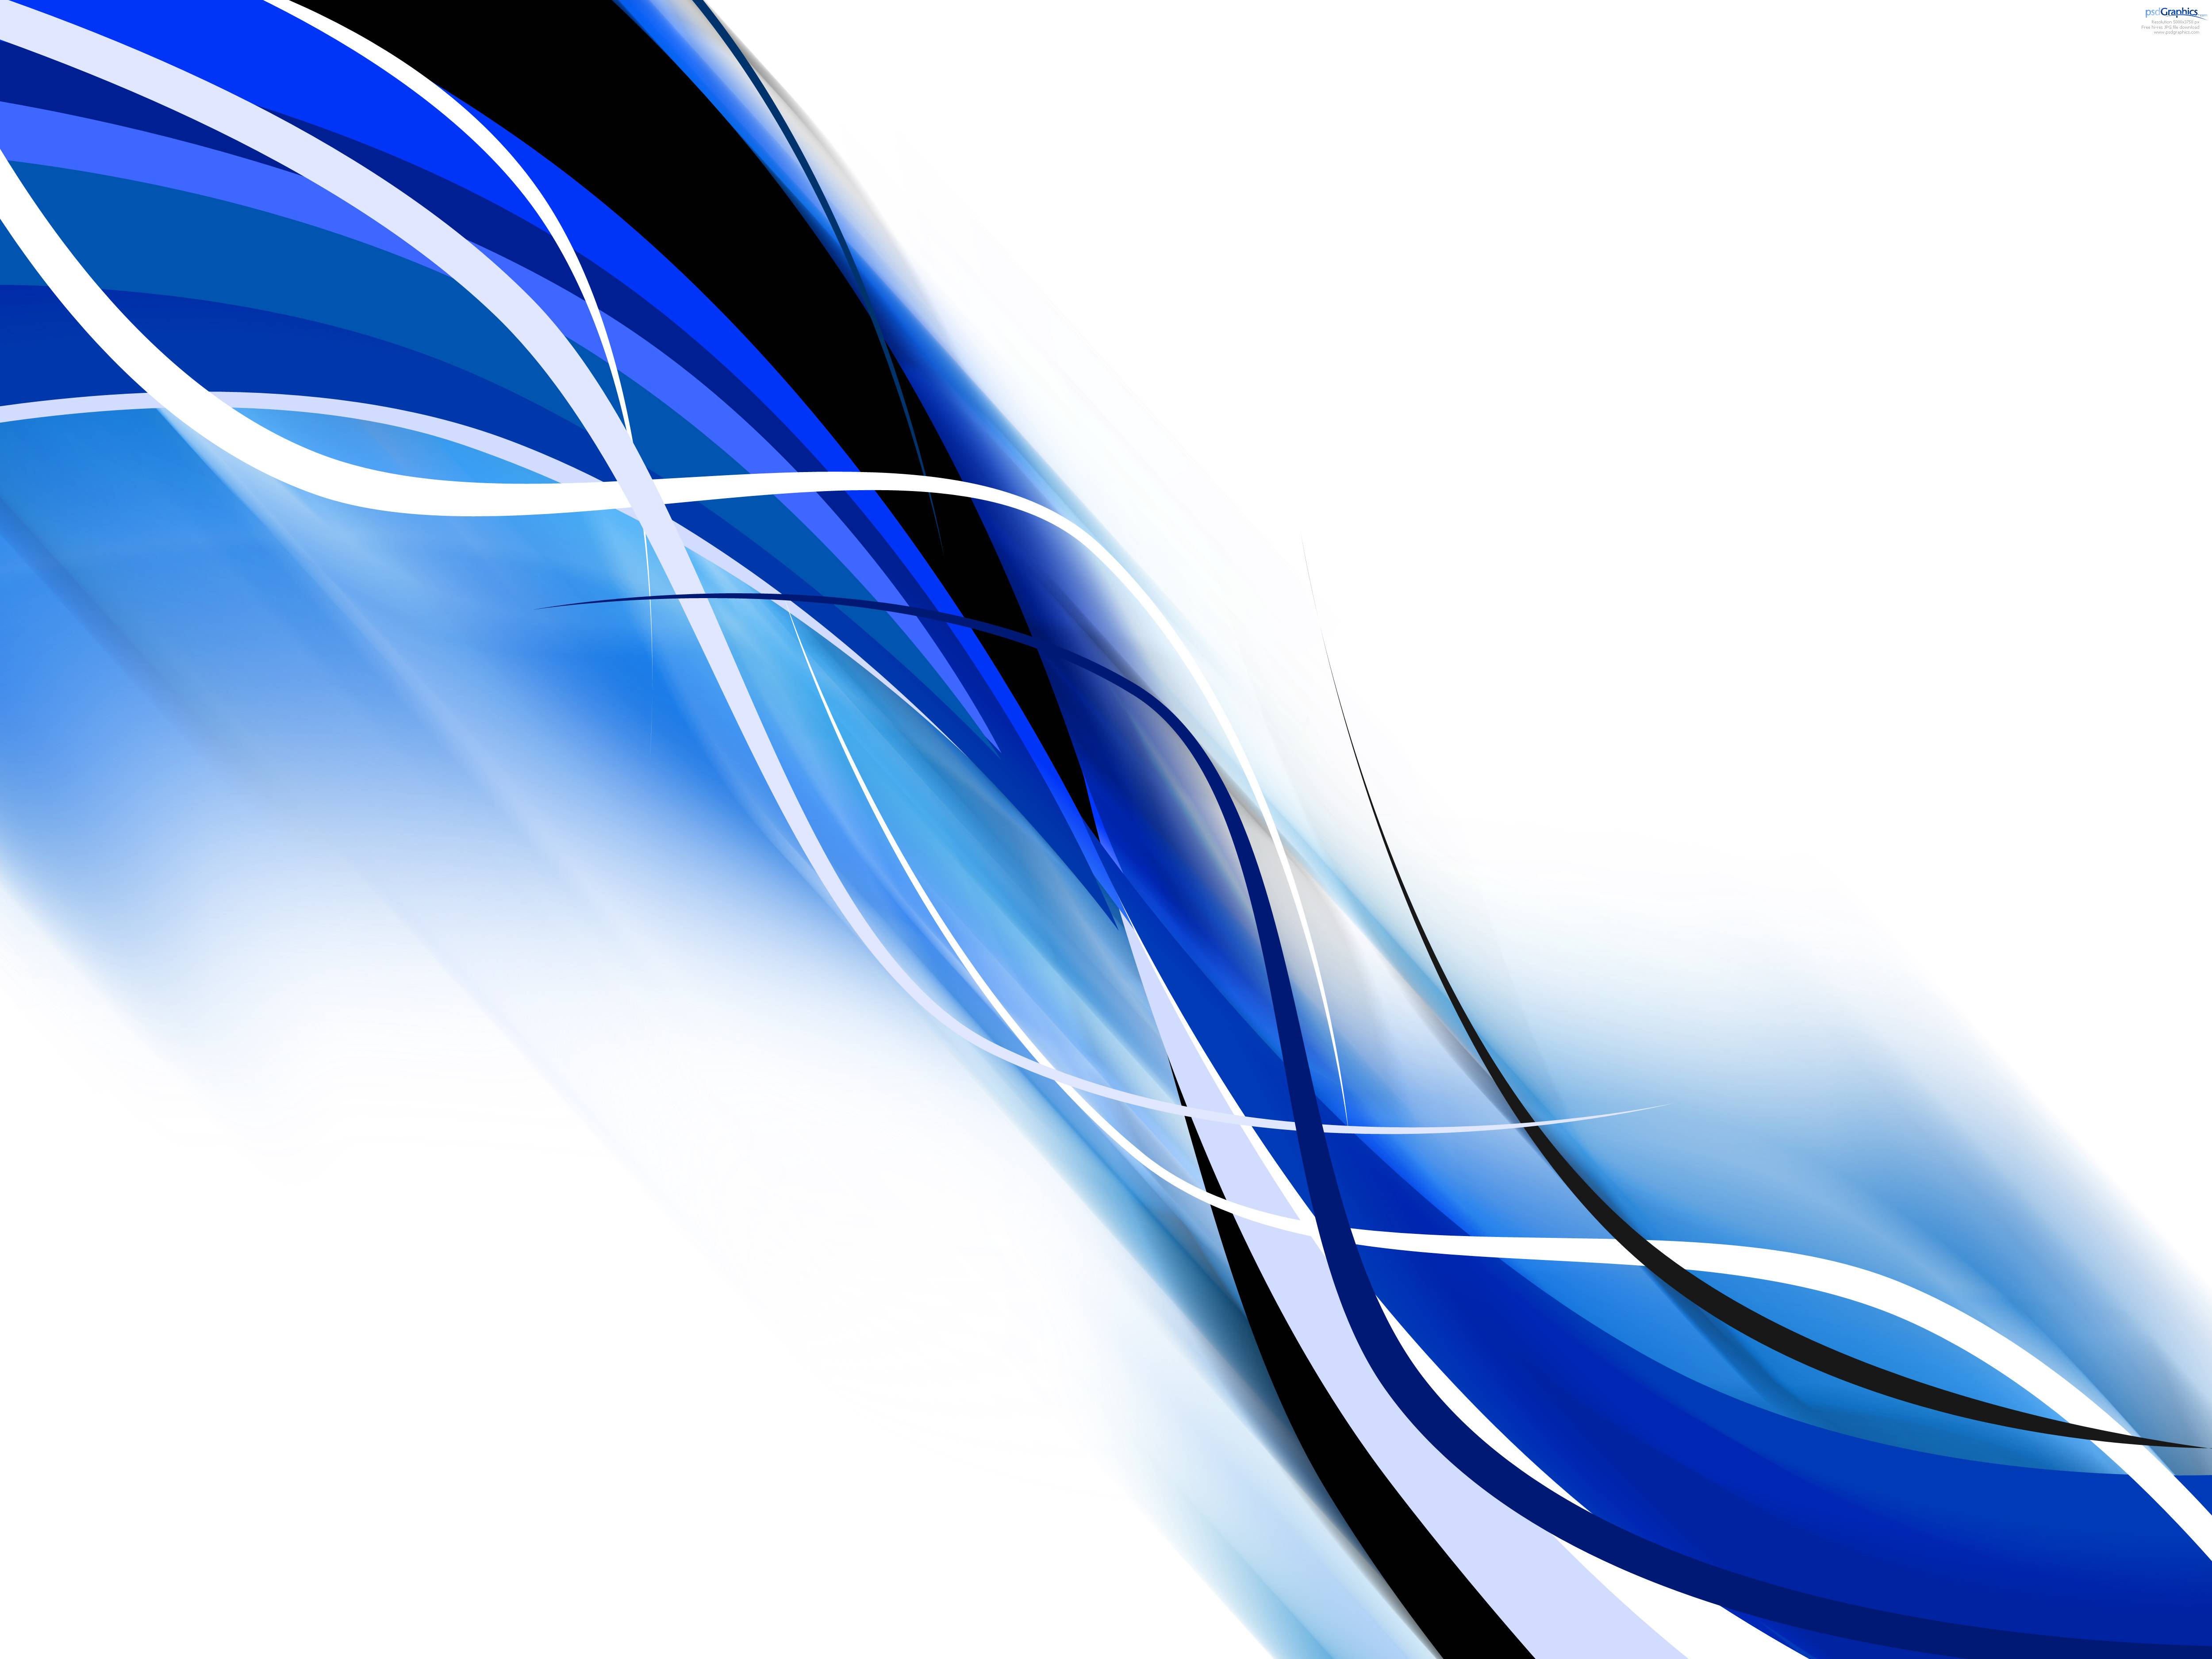 Red and blue abstract waves background